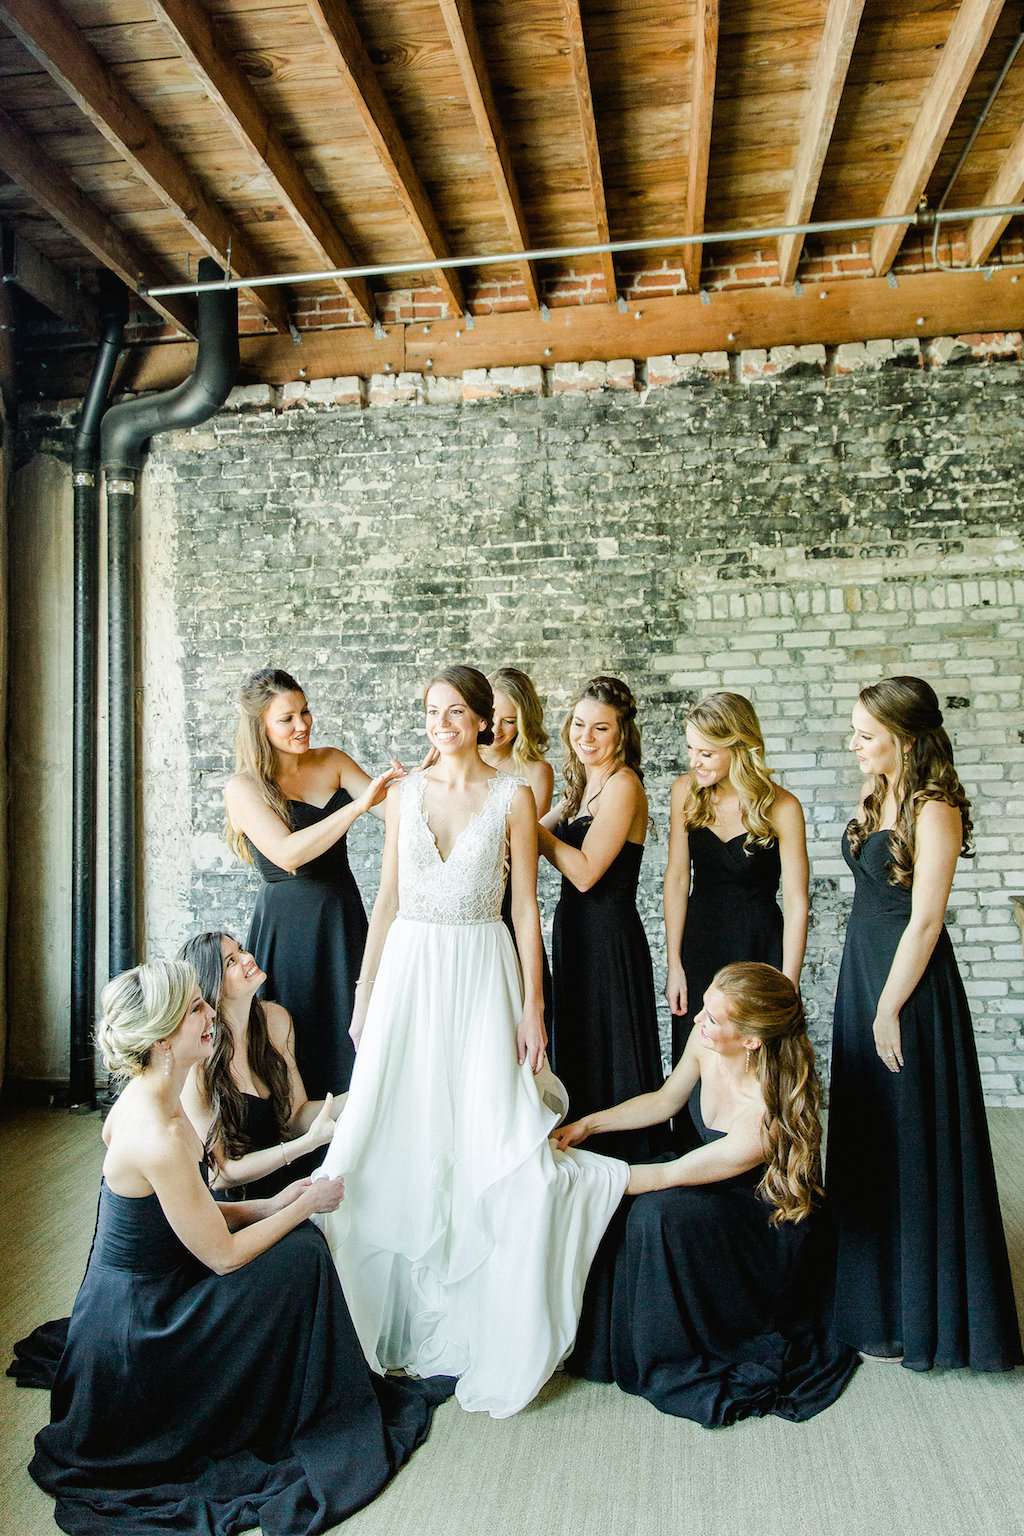 Bridal Party Getting Ready Portrait, Bride in V Neck Lace Bodice Hayley Paige Dress, Bridesmaids in Strapless Floor Length Black Kenneth Winston Dresses | Tampa Bay Wedding Photographer Ailyn La Torre Photography | Venue Oxford Exchange | Hair and Makeup Femme Akoi Beauty Studio